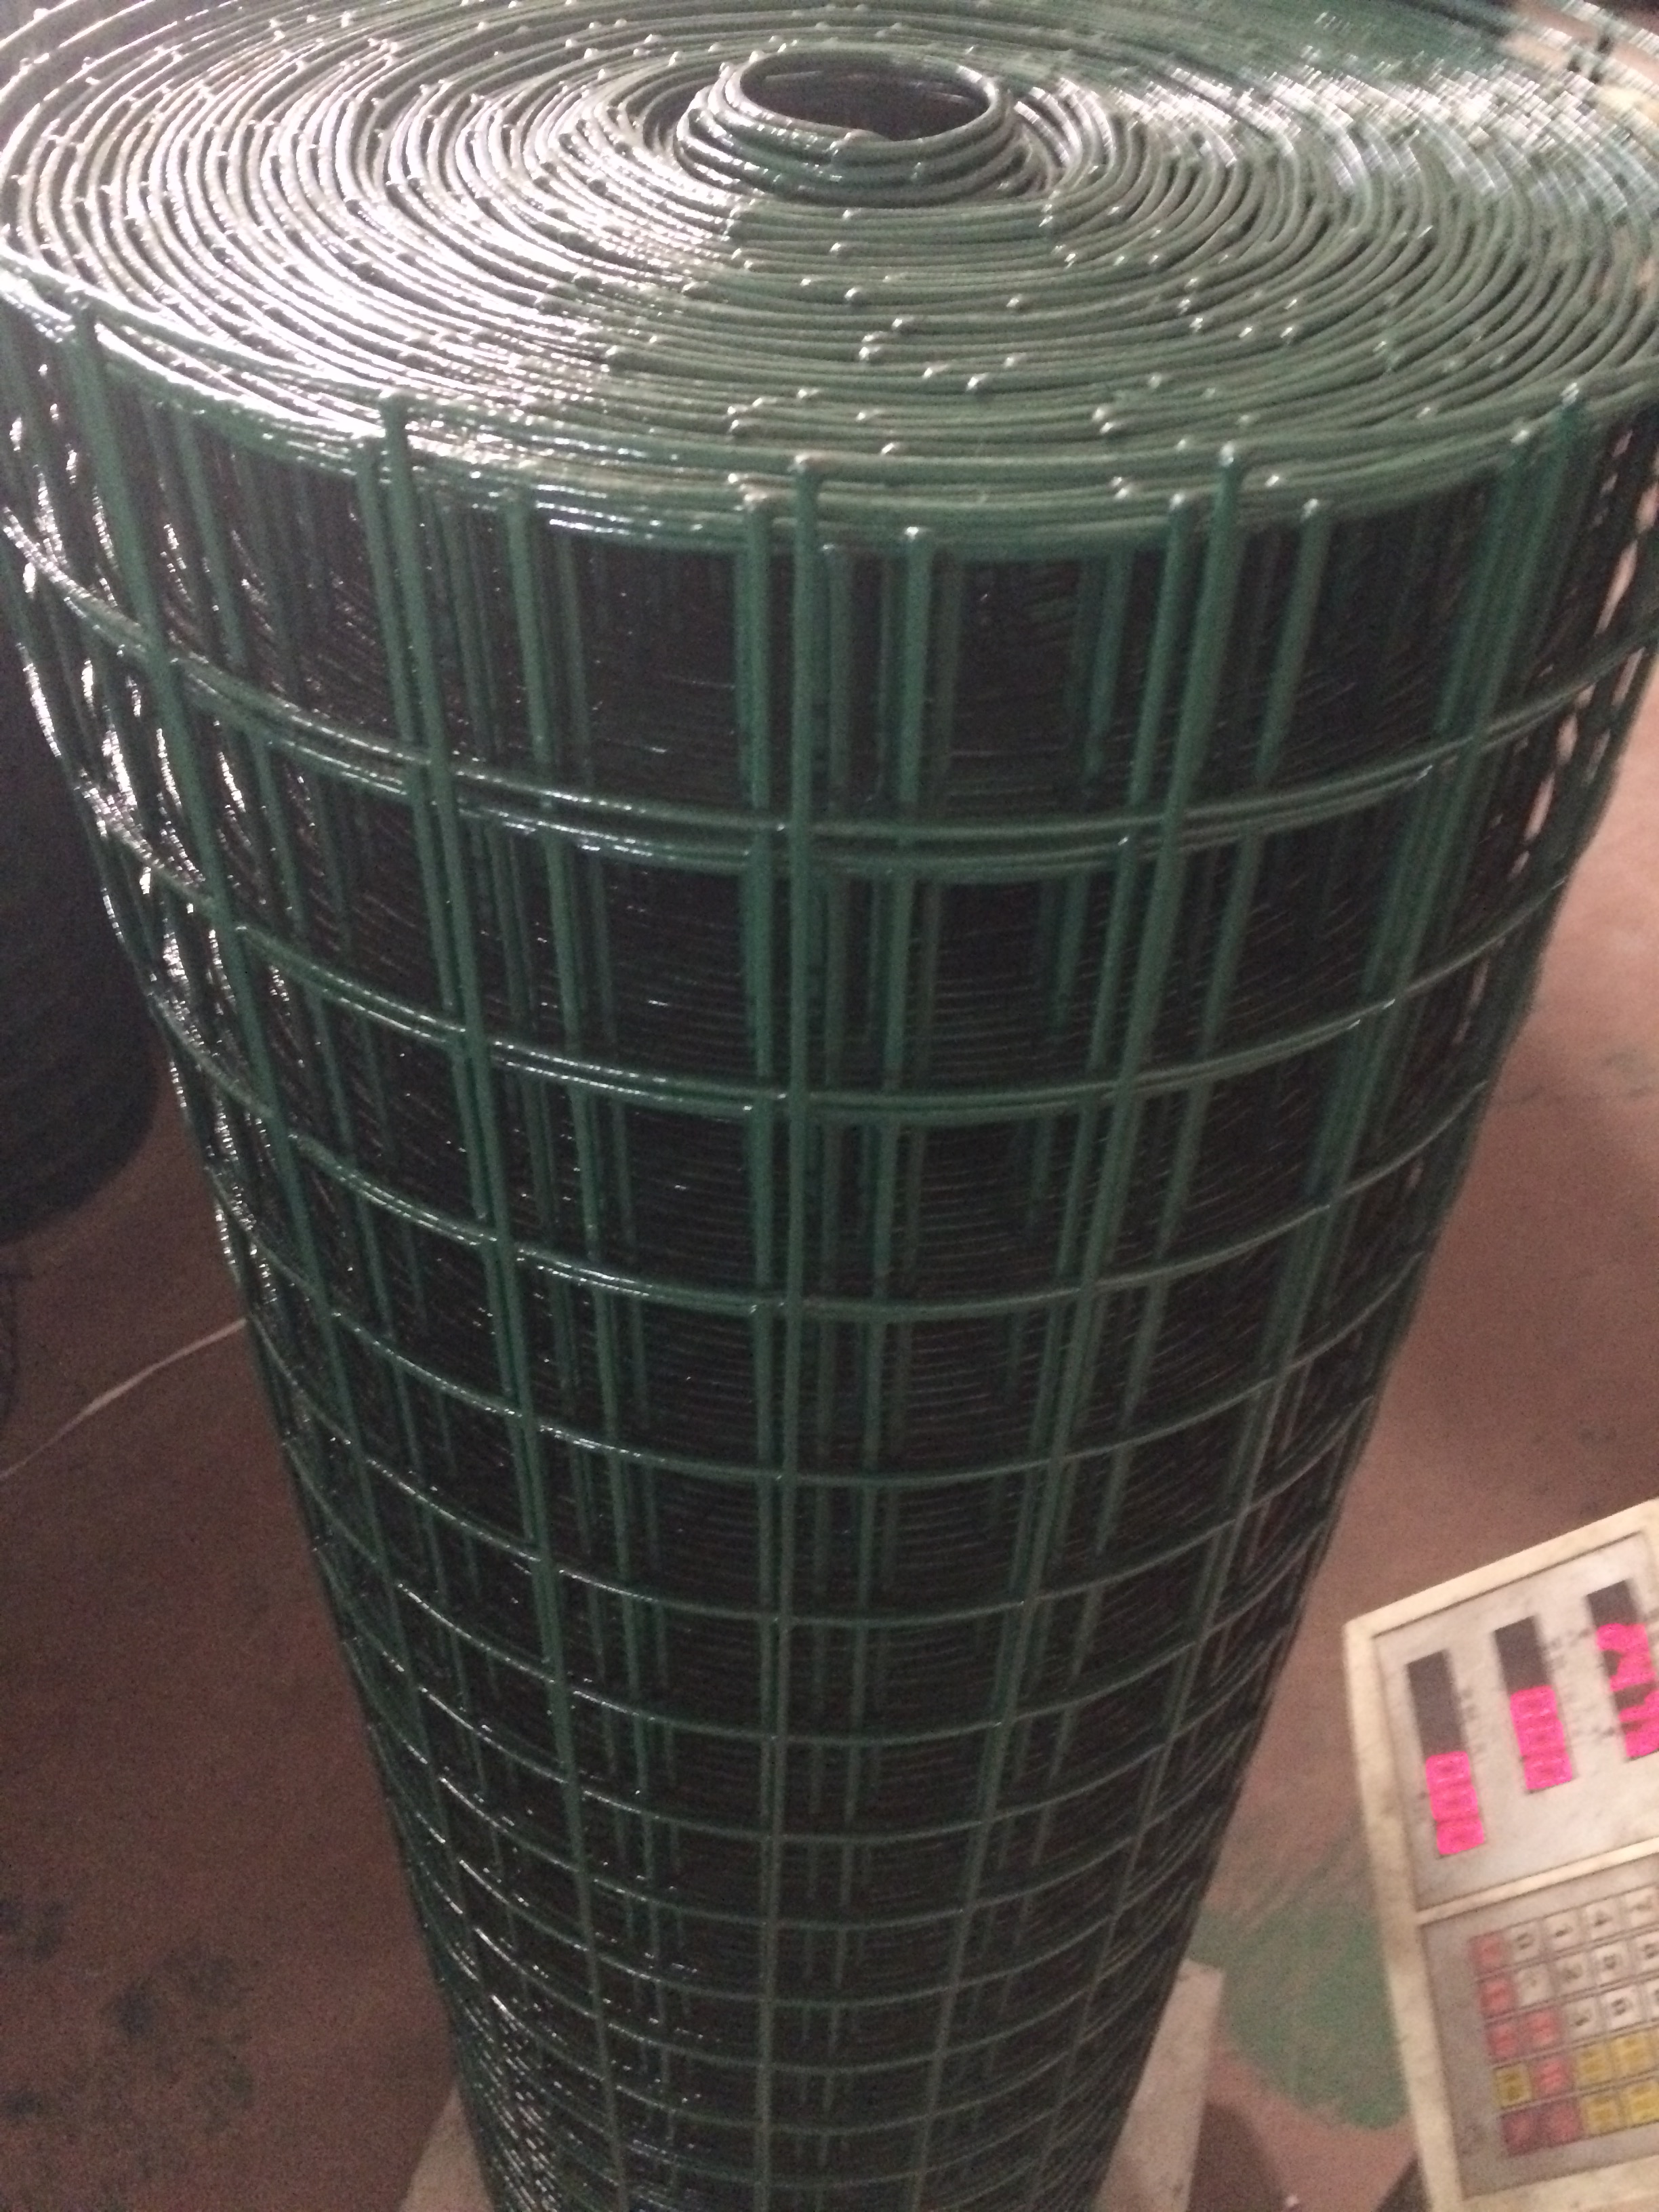 PVC Coated welded wire mesh